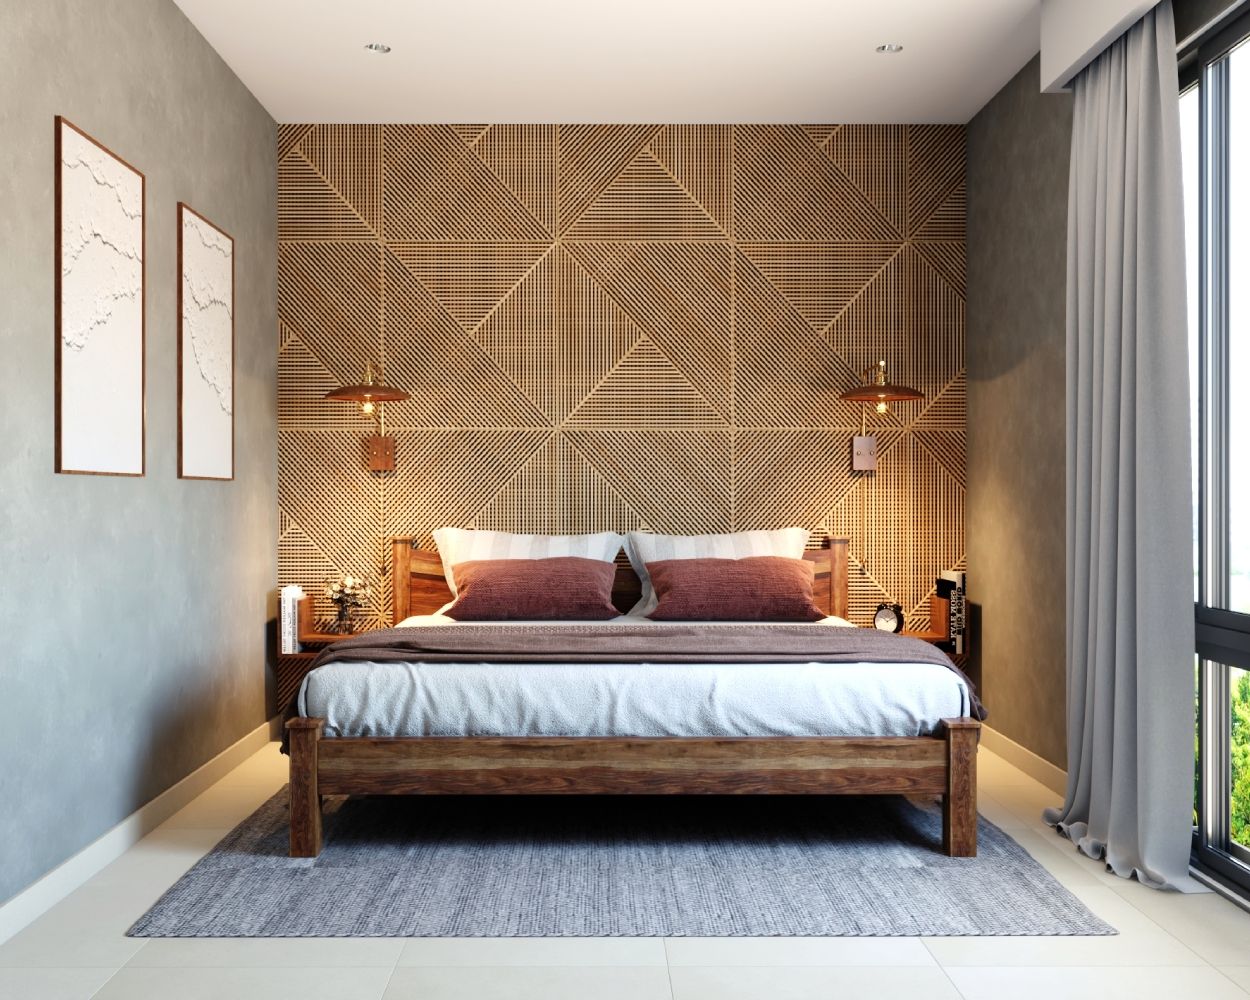 Mid-Century Modern Bedroom Wall Design With Wooden Wall Panel And Grooves